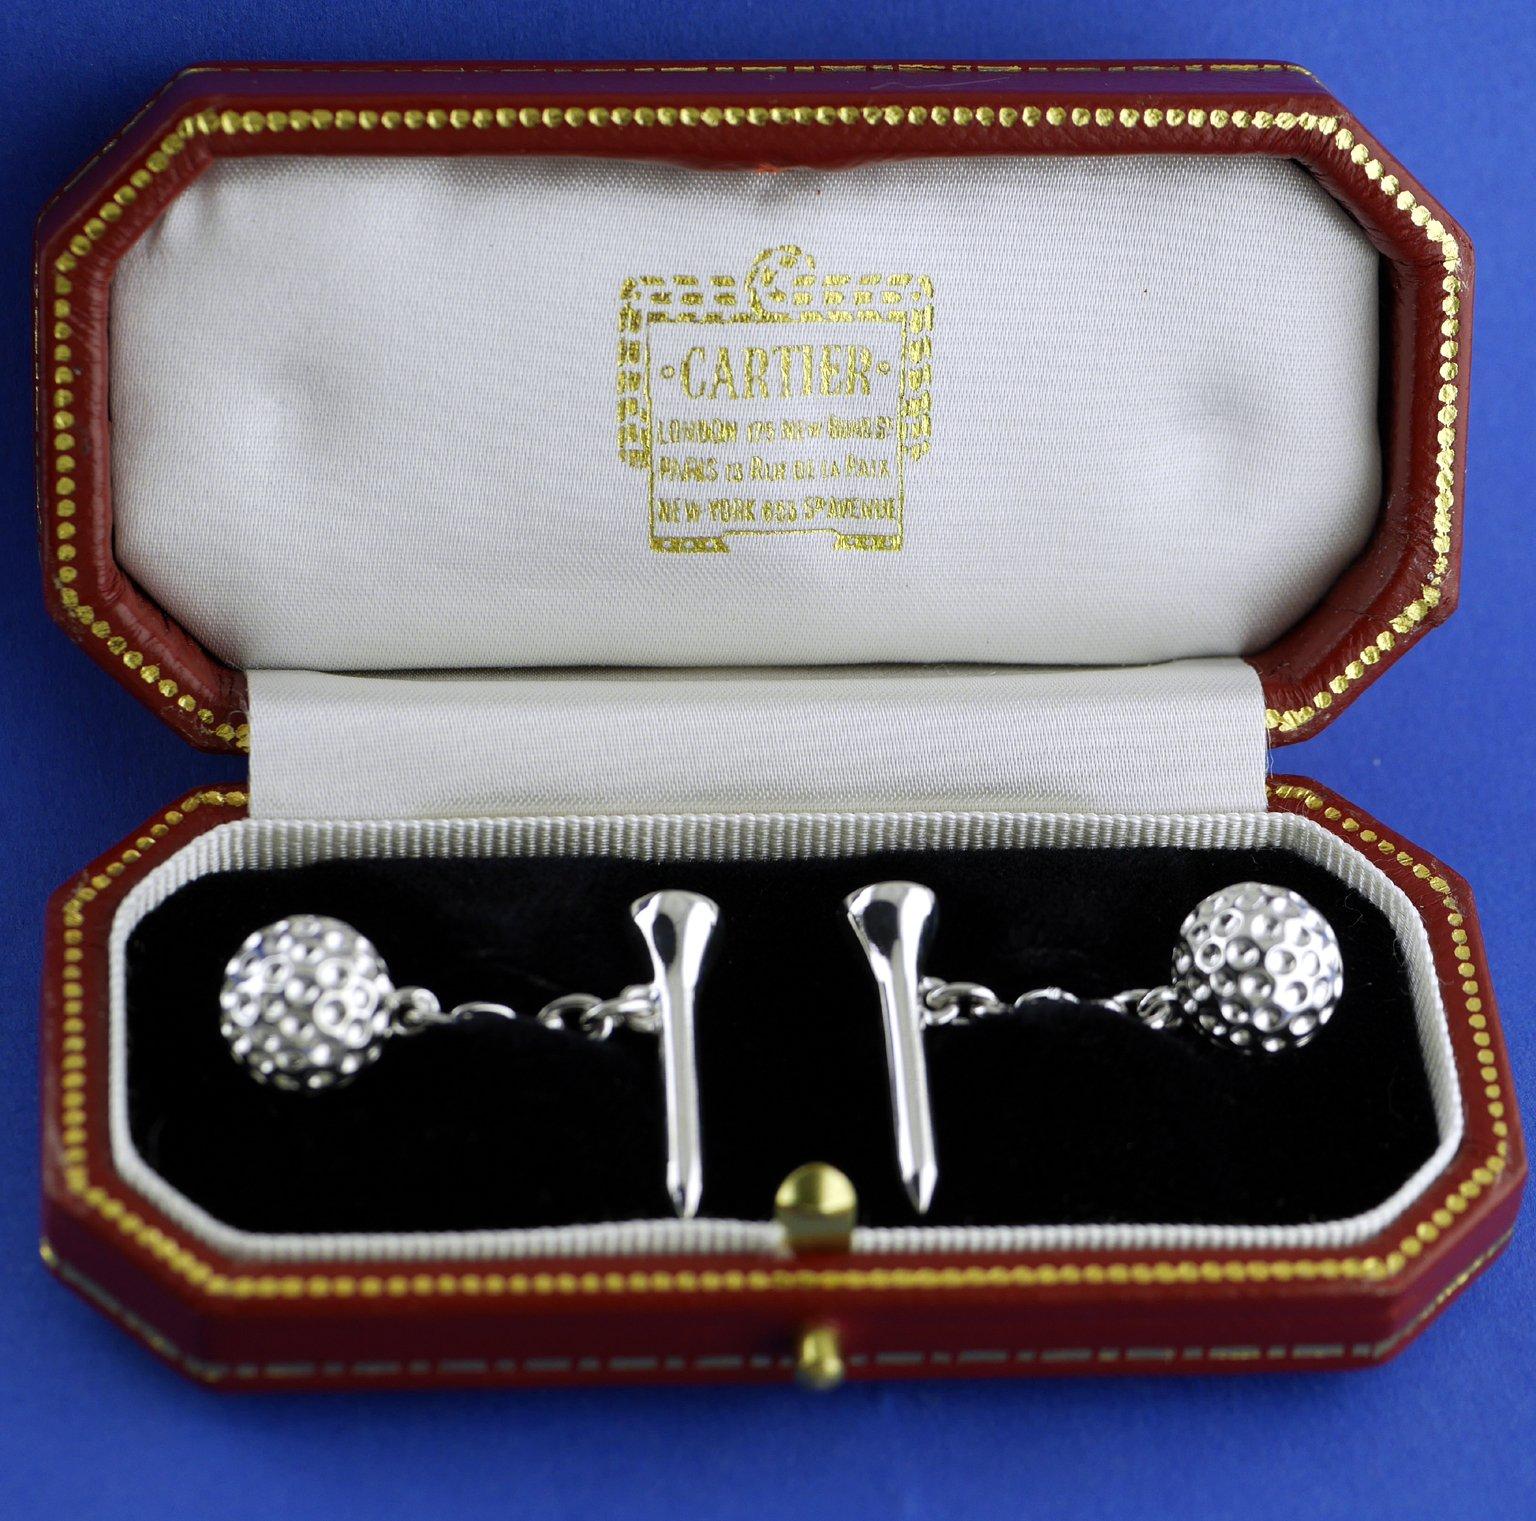 A pair of 18 carat white gold cufflinks by Cartier depicting a golf ball and tee circa 1970.

In fitted Cartier Box.

Dimensions:

Overall Length (including Ball, Chain and Tee) 29mm

Golf Ball (Diameter) 10mm 
Tee (Height) 22mm
Tee (at widest